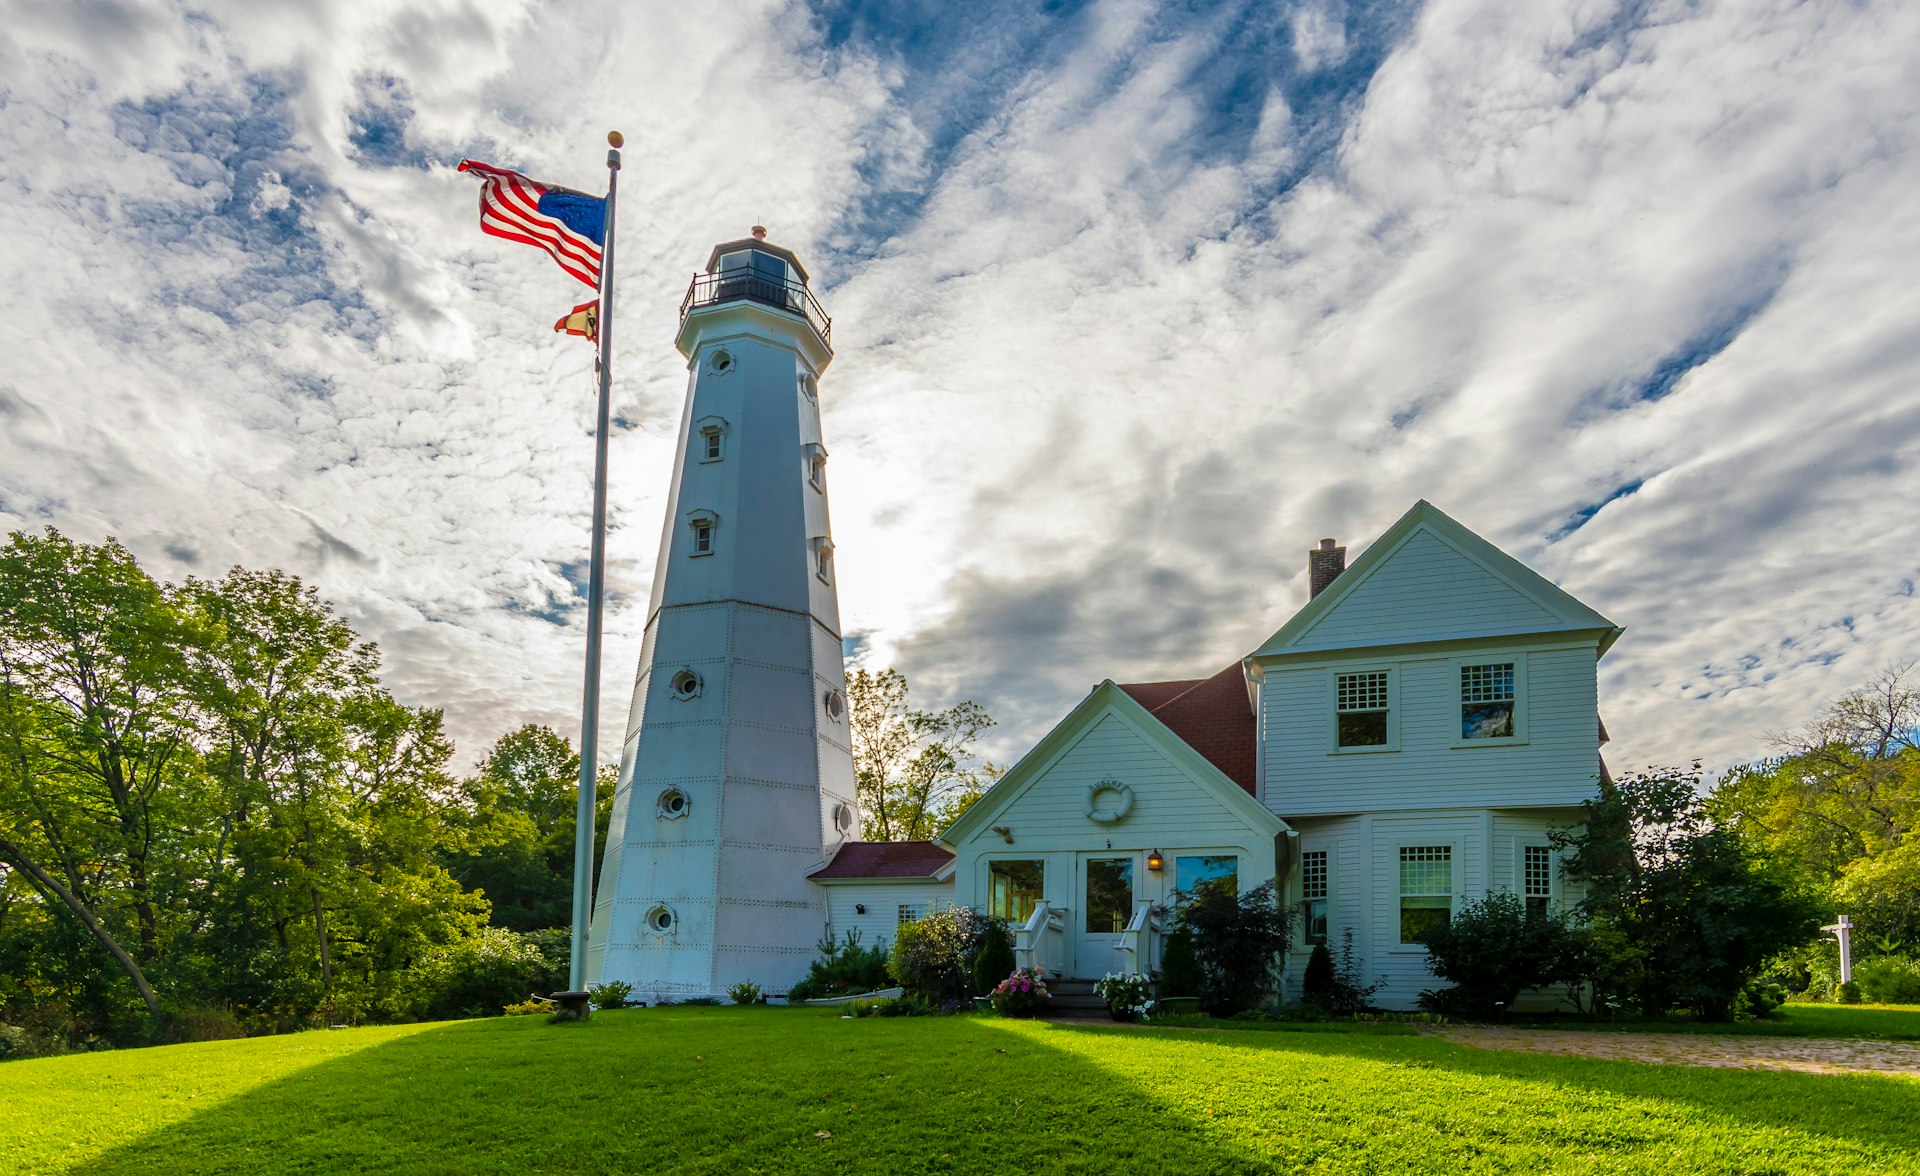 North Point Lighthouse in Milwaukee with American flag flying